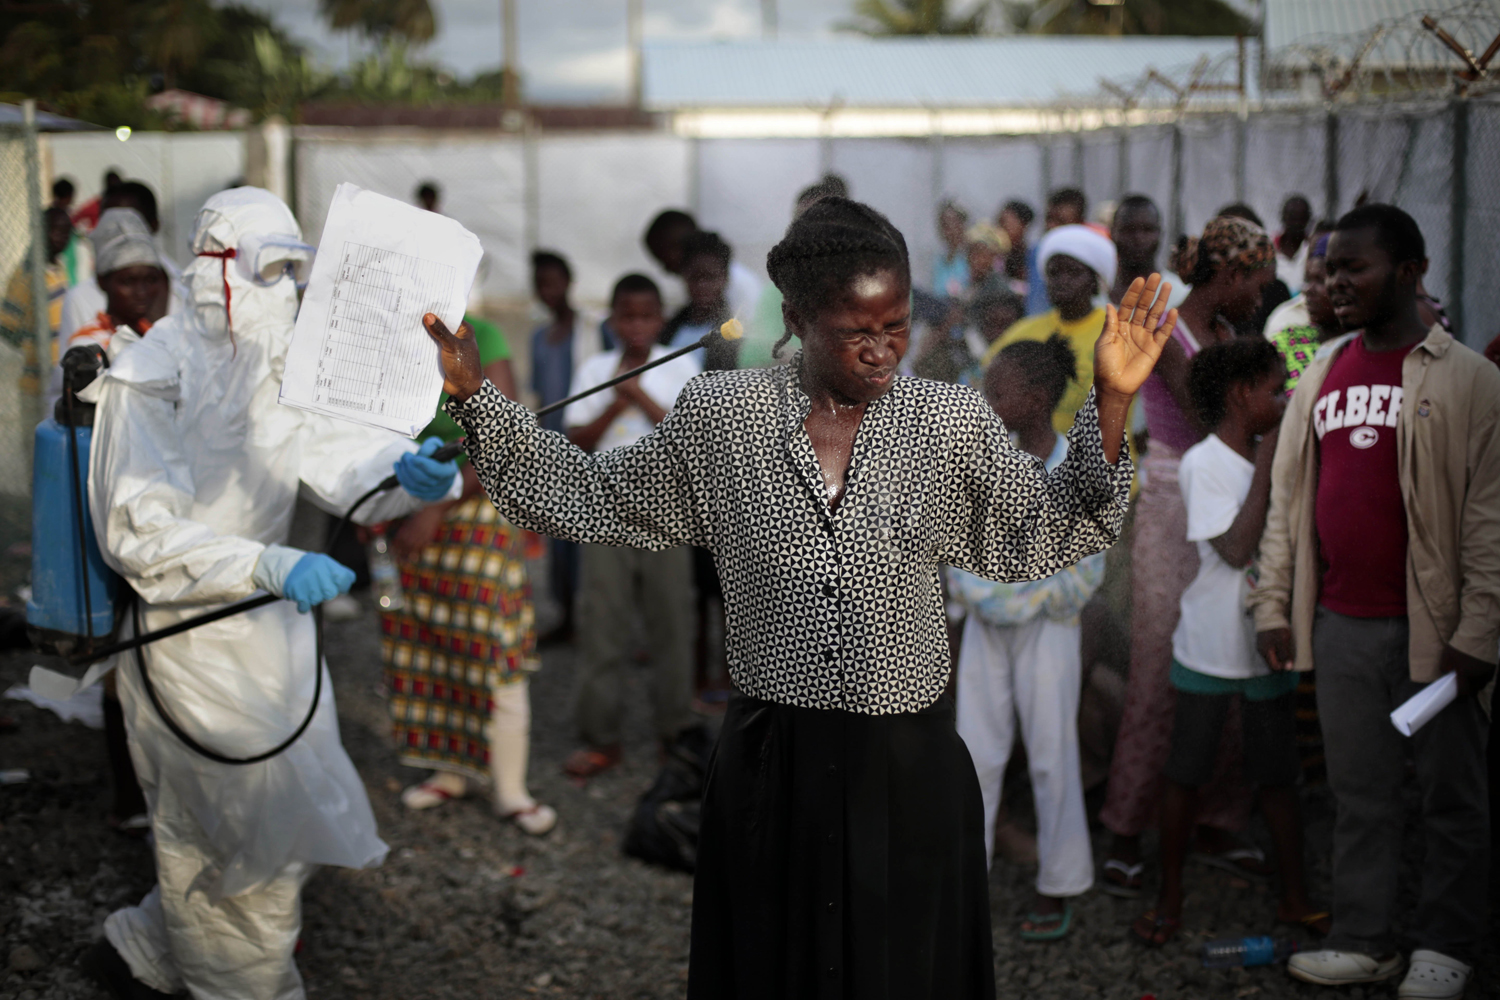 A woman being discharged from the Island Clinic Ebola treatment center in Monrovia, Liberia, is sprayed with disinfectant, Sept. 30, 2014.